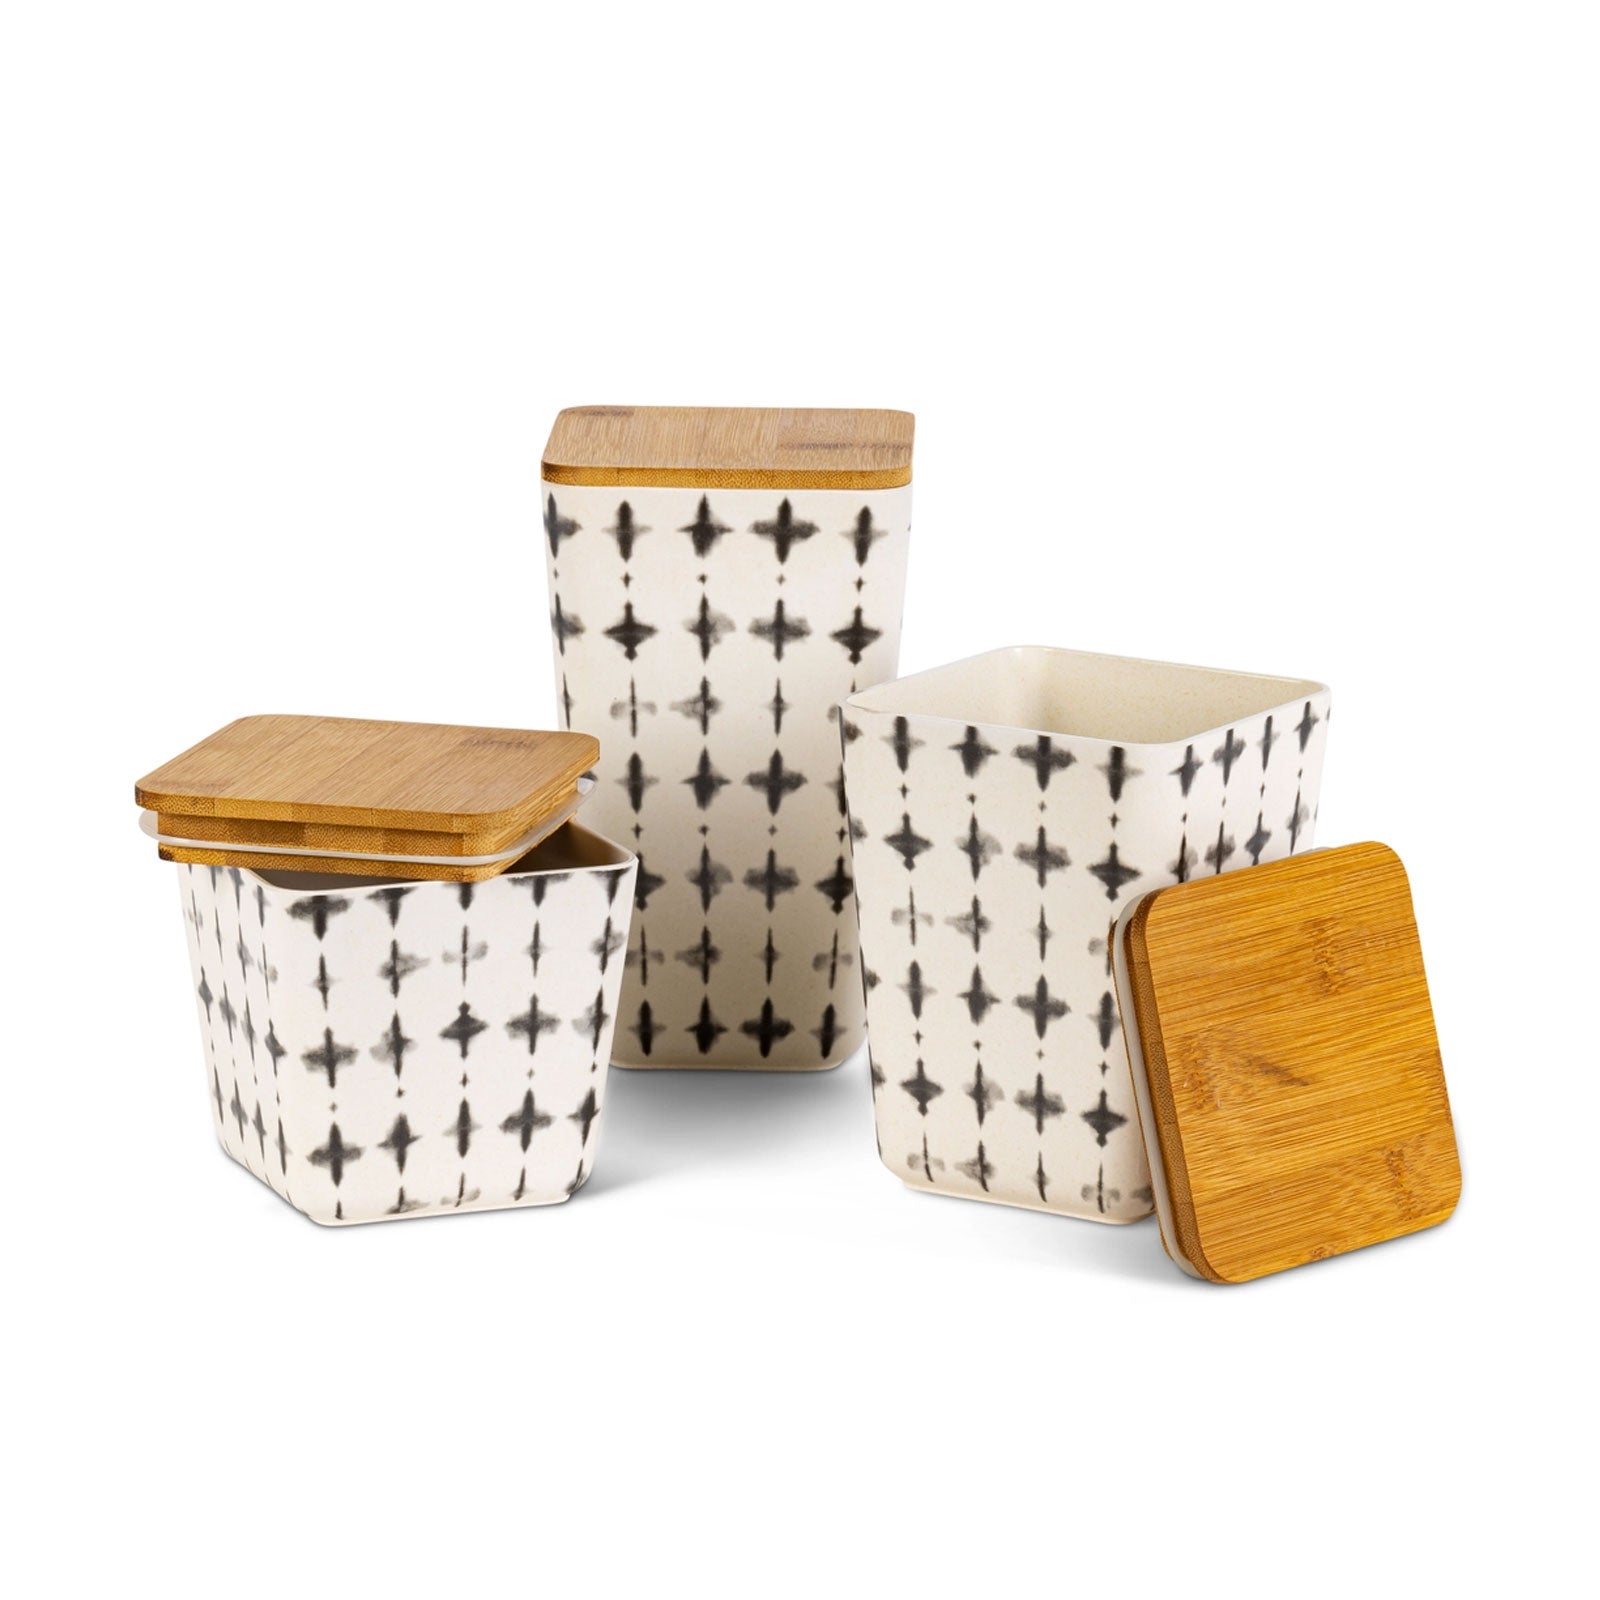 Faded Nesting Containers with Lid, Set of 3